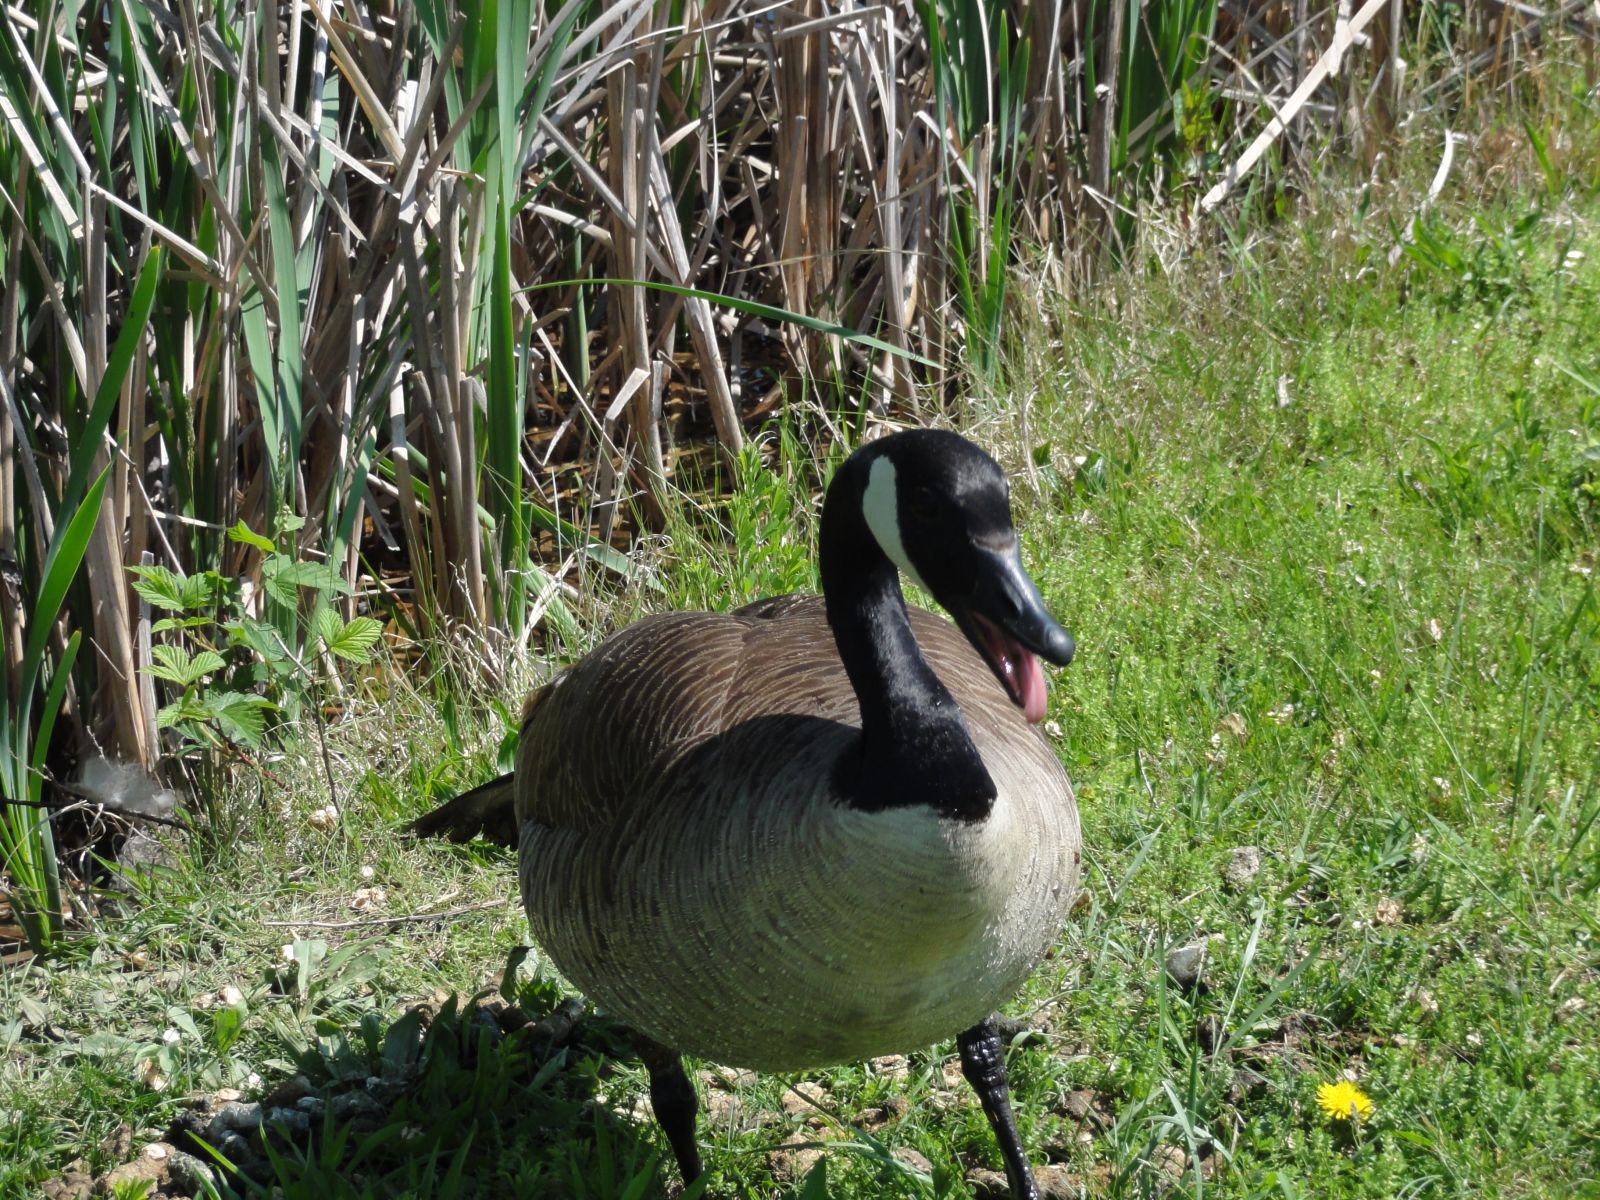 Chesapeake, VA - Geese Removal & Control Services